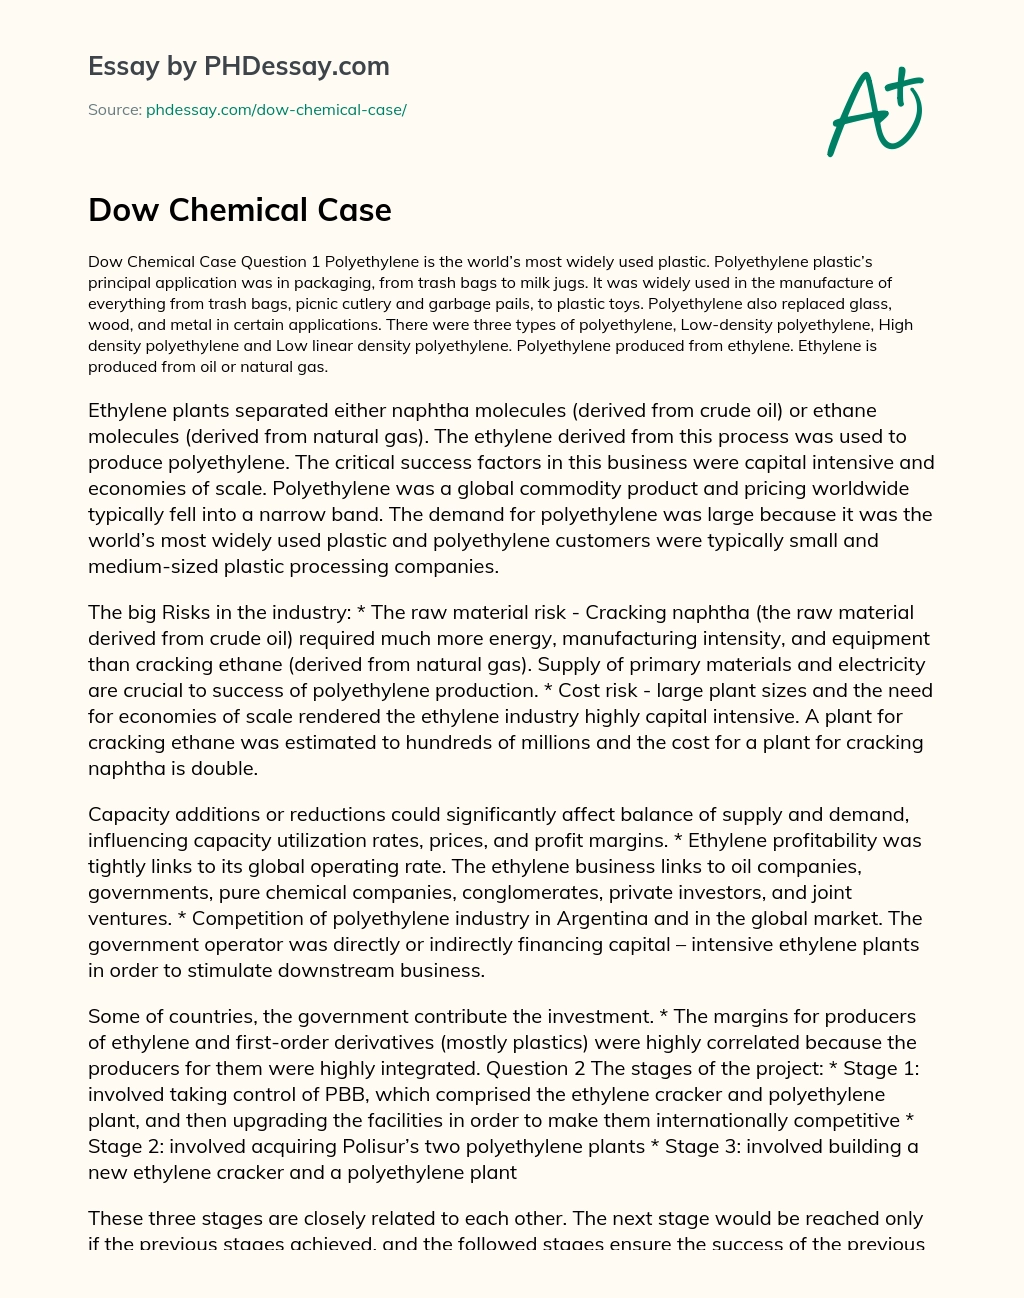 Dow Chemical Case essay